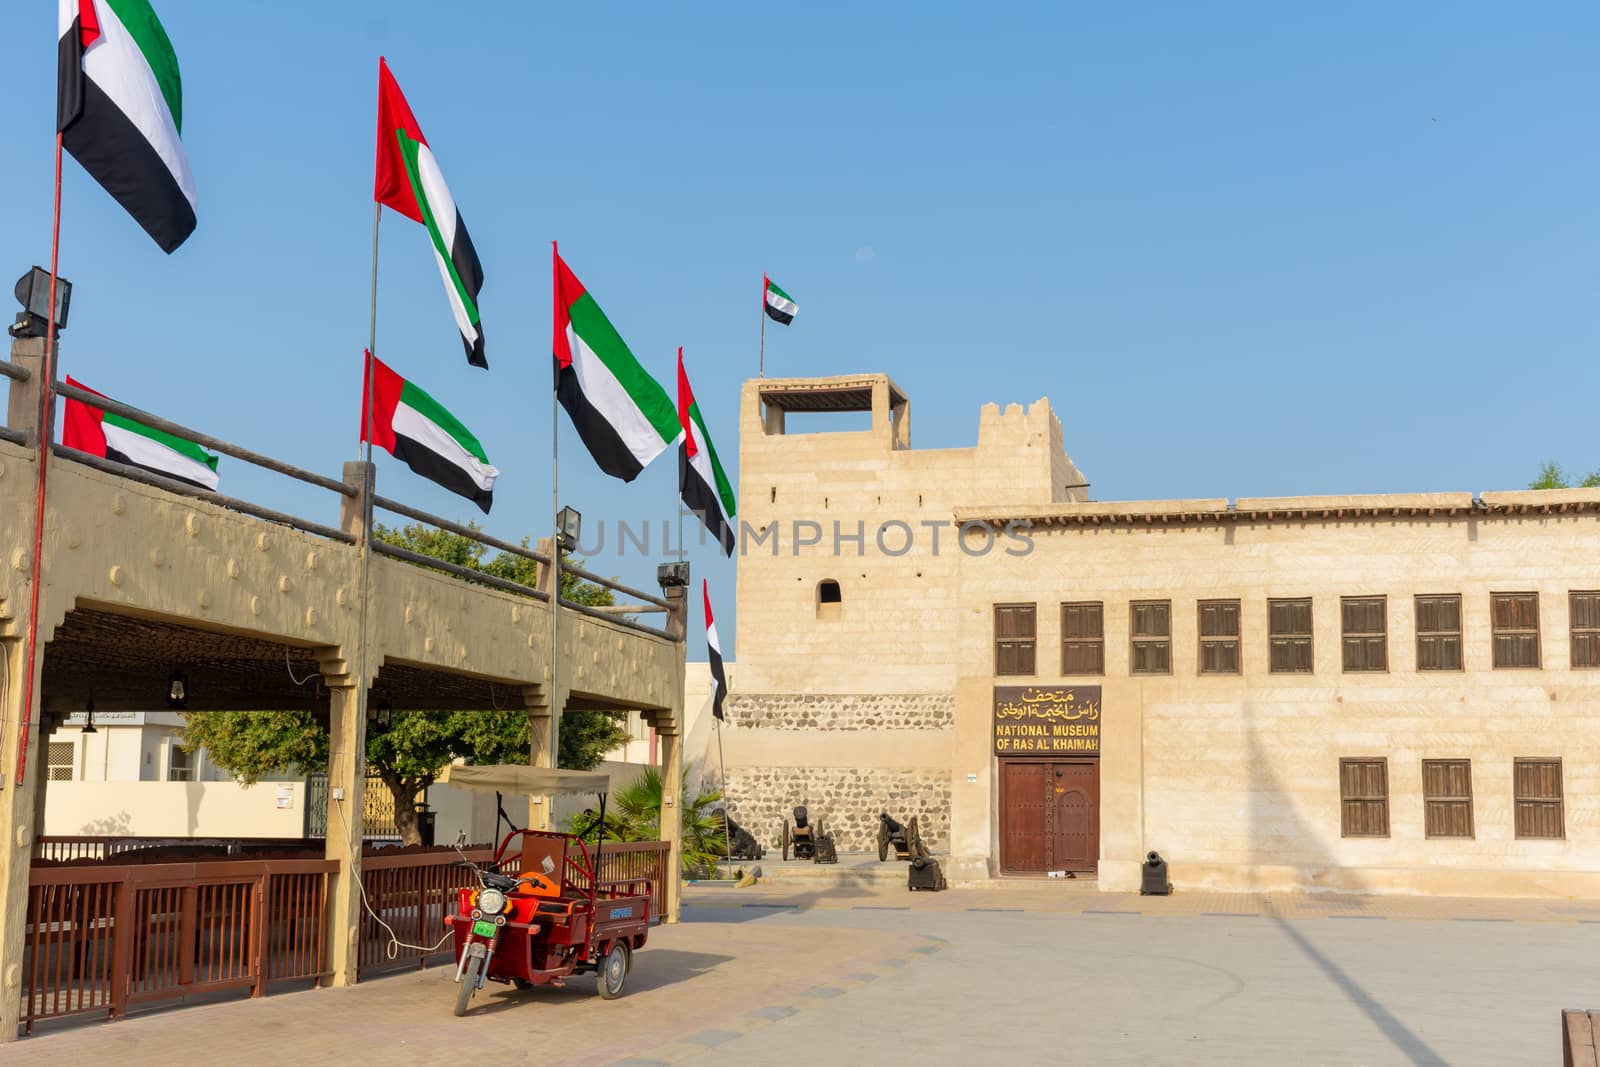 Entrance of the Ras al Khaimah Museum in the morning sun with fl by kingmaphotos